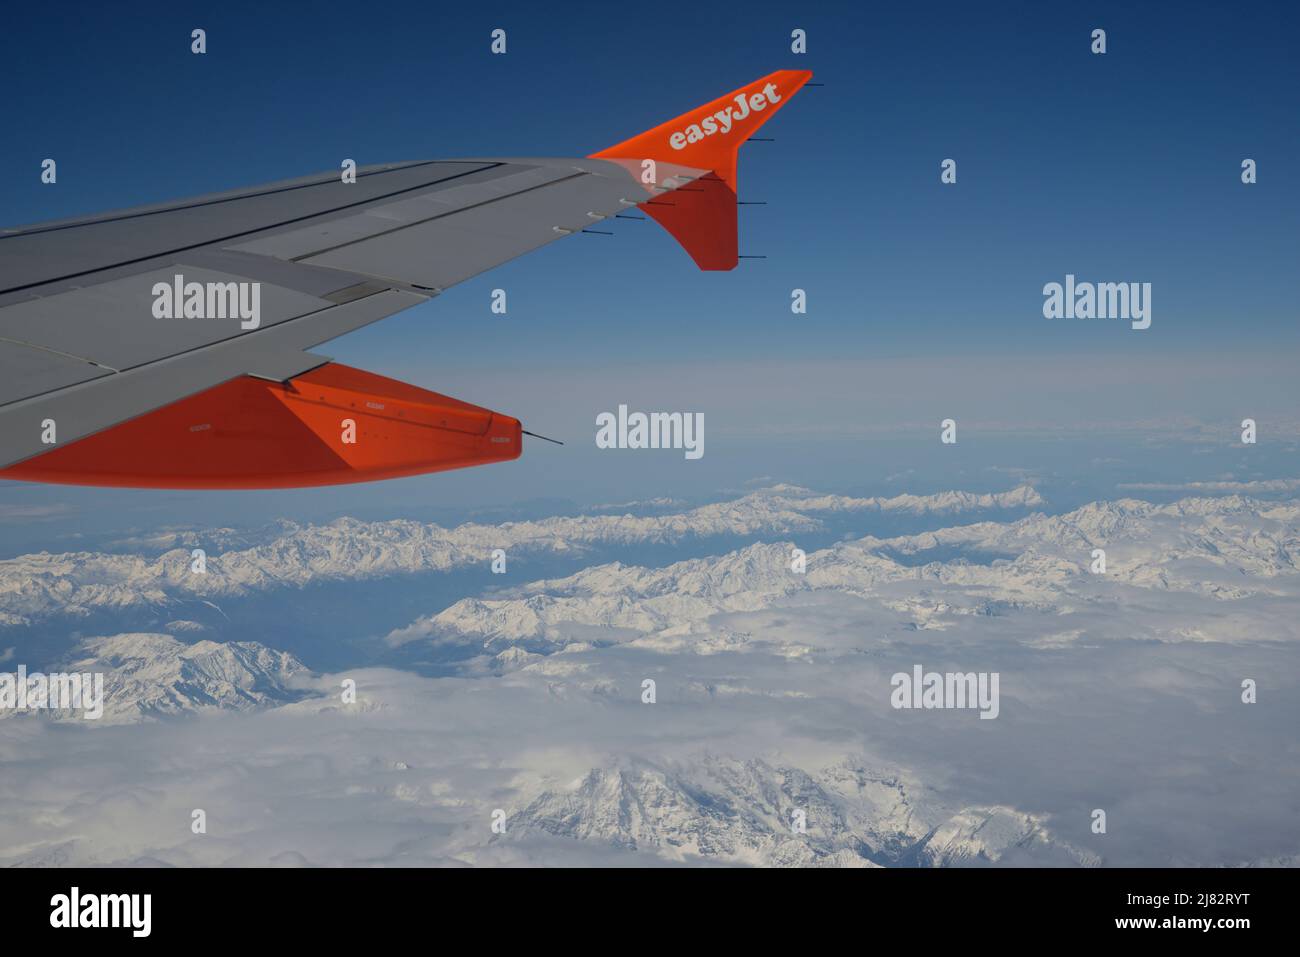 View from a aircraft window of an EasyJet wing and the European Alps below. Stock Photo